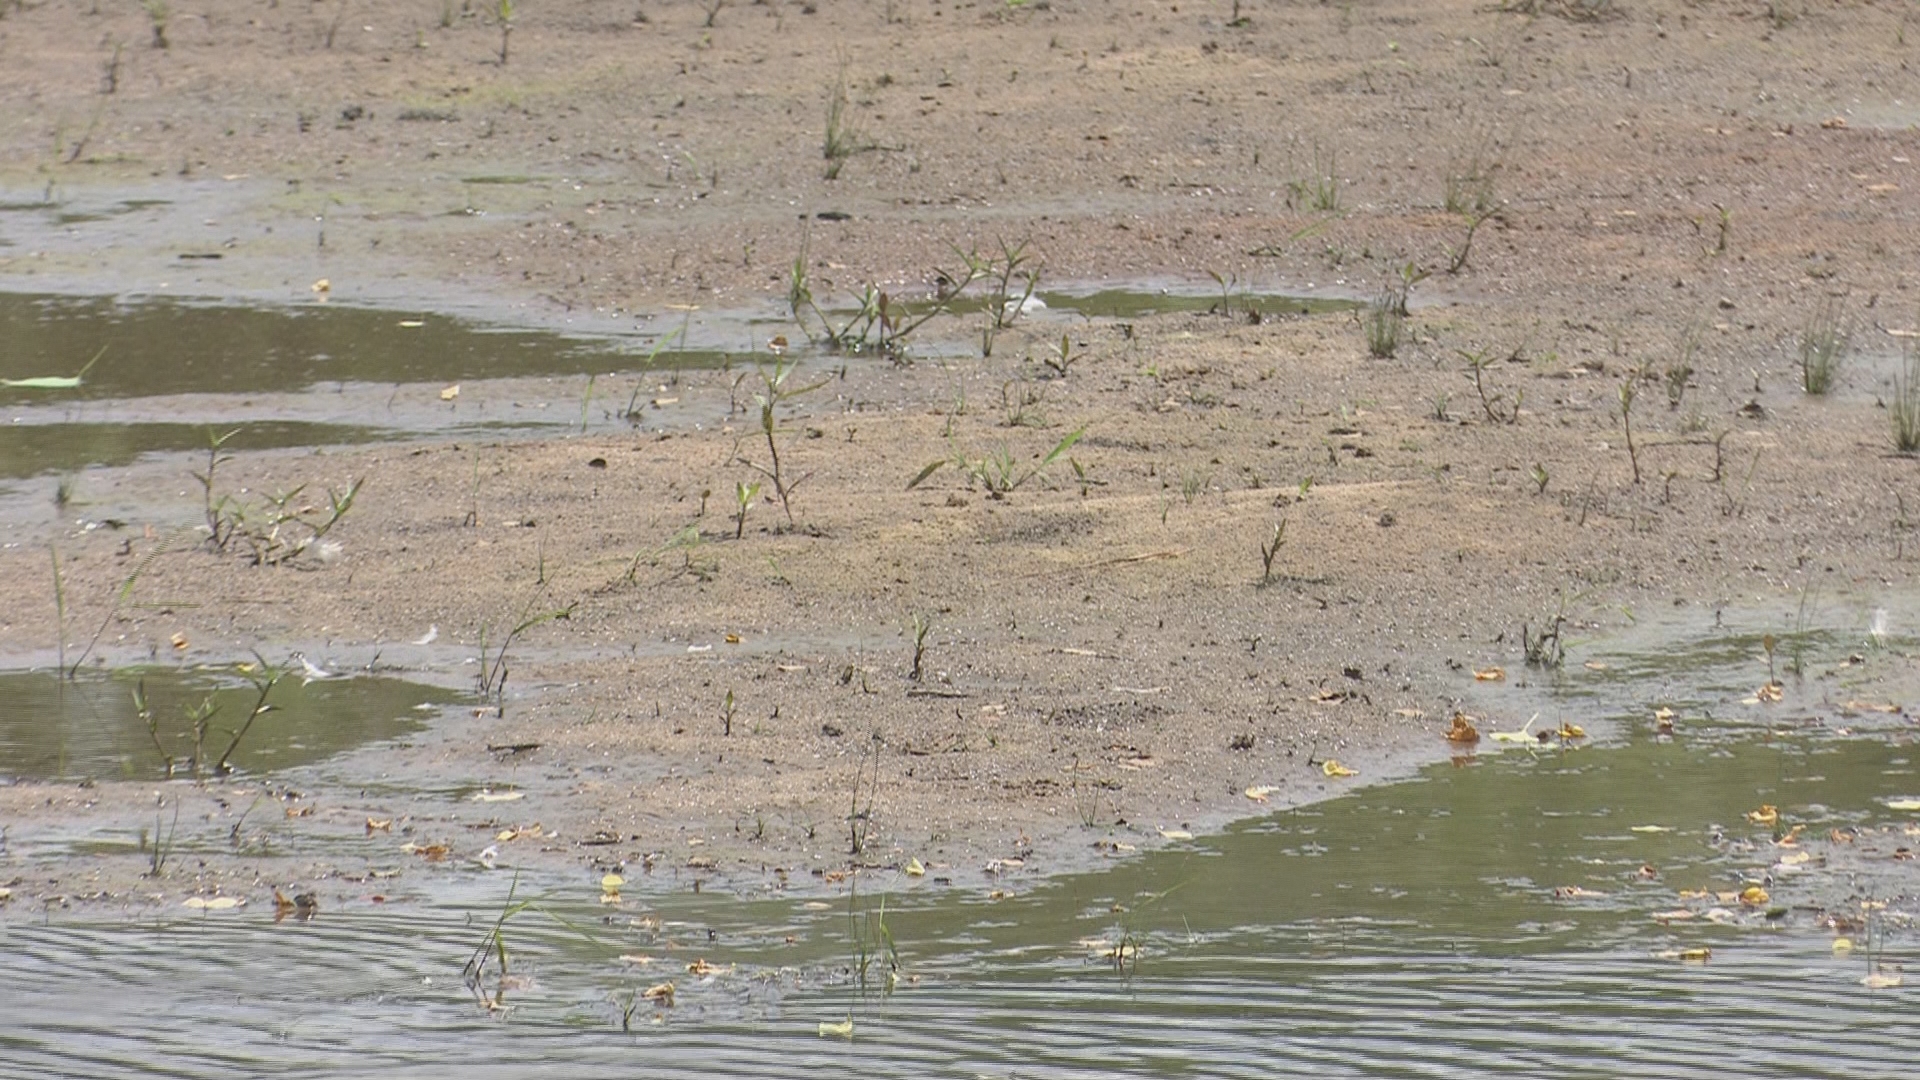 A Warner Robins man blames the city's lack of stormwater run-off enforcement on problems at the lake near his home.